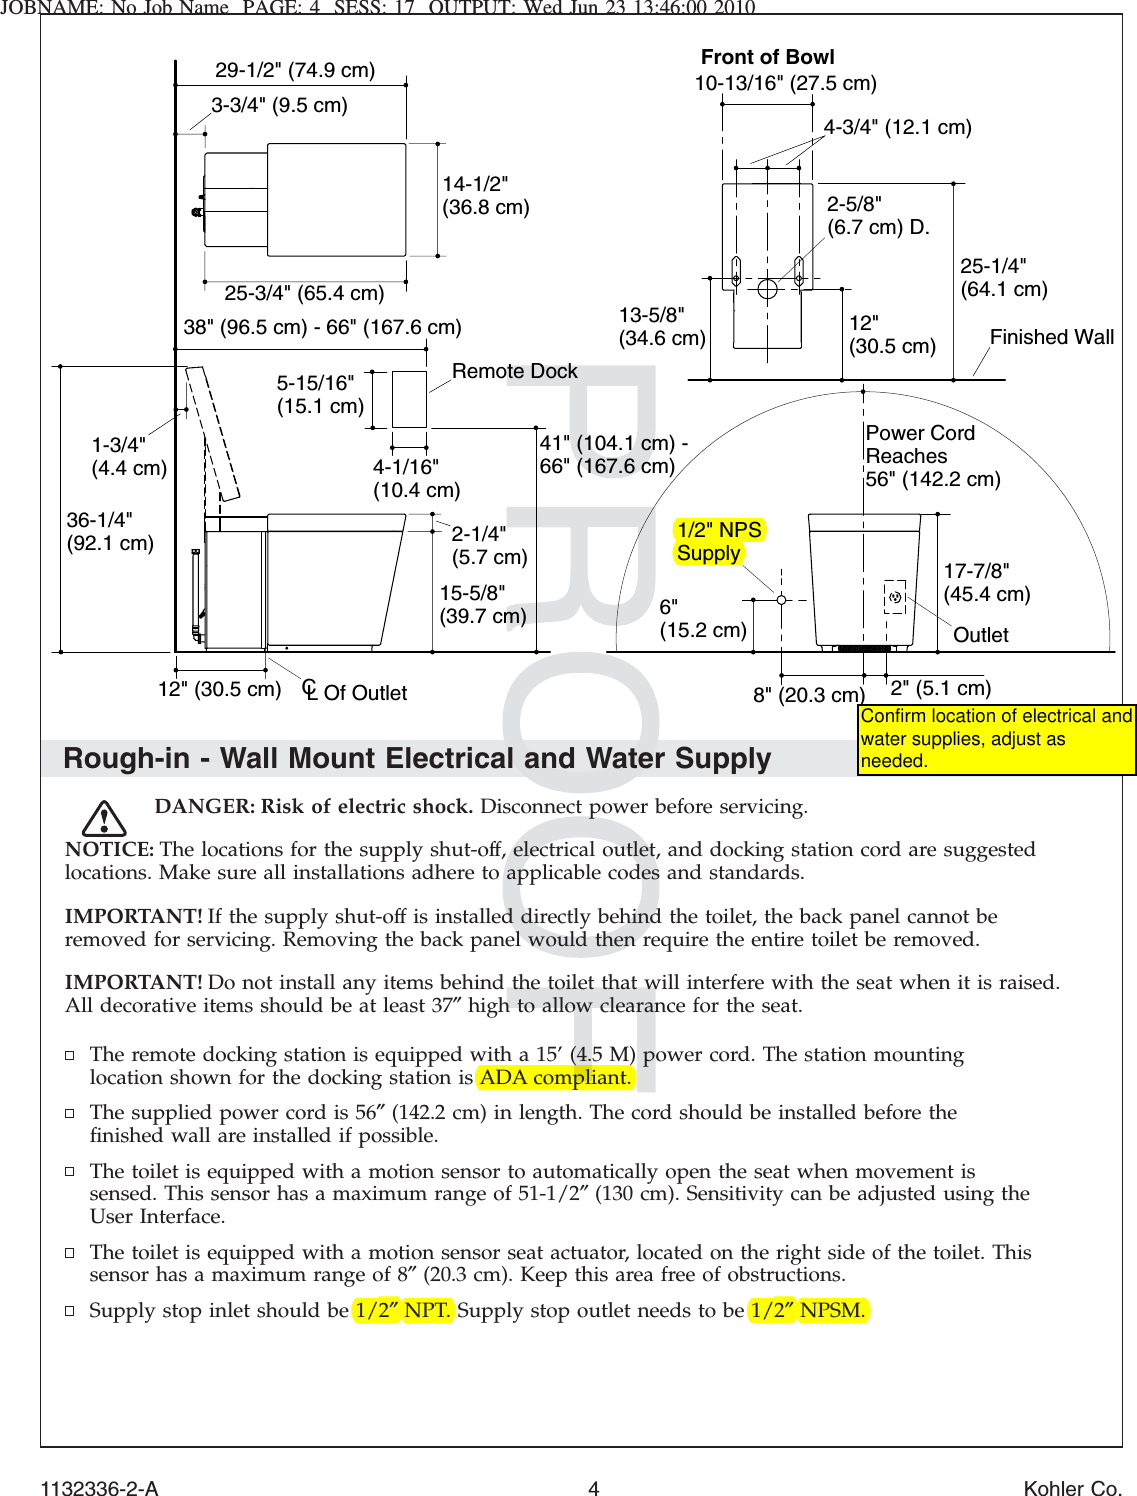 JOBNAME: No Job Name PAGE: 4 SESS: 17 OUTPUT: Wed Jun 23 13:46:00 2010Rough-in - Wall Mount Electrical and Water SupplyDANGER: Risk of electric shock. Disconnect power before servicing.NOTICE: The locations for the supply shut-off, electrical outlet, and docking station cord are suggestedlocations. Make sure all installations adhere to applicable codes and standards.IMPORTANT! If the supply shut-off is installed directly behind the toilet, the back panel cannot beremoved for servicing. Removing the back panel would then require the entire toilet be removed.IMPORTANT! Do not install any items behind the toilet that will interfere with the seat when it is raised.All decorative items should be at least 37″high to allow clearance for the seat.The remote docking station is equipped with a 15’ (4.5 M) power cord. The station mountinglocation shown for the docking station is ADA compliant.The supplied power cord is 56″(142.2 cm) in length. The cord should be installed before theﬁnished wall are installed if possible.The toilet is equipped with a motion sensor to automatically open the seat when movement issensed. This sensor has a maximum range of 51-1/2″(130 cm). Sensitivity can be adjusted using theUser Interface.The toilet is equipped with a motion sensor seat actuator, located on the right side of the toilet. Thissensor has a maximum range of 8″(20.3 cm). Keep this area free of obstructions.Supply stop inlet should be 1/2″NPT. Supply stop outlet needs to be 1/2″NPSM.Front of Bowl25-3/4&quot; (65.4 cm)2-5/8&quot;(6.7 cm) D.14-1/2&quot;(36.8 cm)25-1/4&quot;(64.1 cm)13-5/8&quot;(34.6 cm)10-13/16&quot; (27.5 cm)Finished Wall3-3/4&quot; (9.5 cm)29-1/2&quot; (74.9 cm)12&quot;(30.5 cm)12&quot; (30.5 cm)15-5/8&quot;(39.7 cm)2-1/4&quot;(5.7 cm)1-3/4&quot;(4.4 cm)36-1/4&quot;(92.1 cm)Power Cord Reaches56&quot; (142.2 cm)CL Of Outlet4-1/16&quot;(10.4 cm)5-15/16&quot;(15.1 cm)41&quot; (104.1 cm) -66&quot; (167.6 cm)38&quot; (96.5 cm) - 66&quot; (167.6 cm)4-3/4&quot; (12.1 cm)Remote Dock2&quot; (5.1 cm)17-7/8&quot;(45.4 cm)6&quot;(15.2 cm)8&quot; (20.3 cm)Outlet1/2&quot; NPSSupply1132336-2-A 4 Kohler Co.Confirm location of electrical and water supplies, adjust as needed.